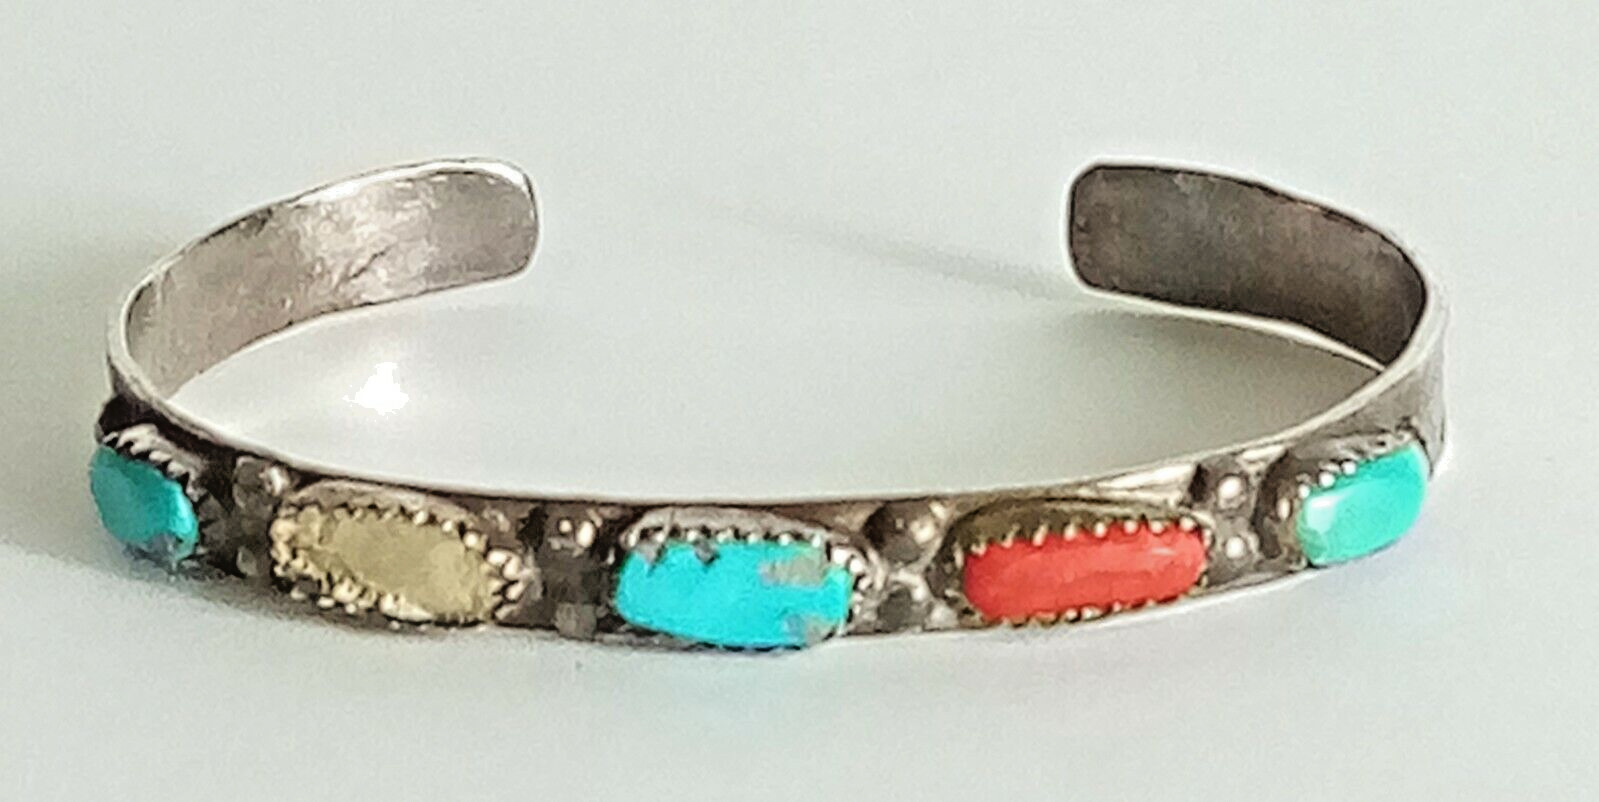 Zuni Indian Tribe Signed L Lasiloo Sterling Silver Turquoise Coral and Bracelet 